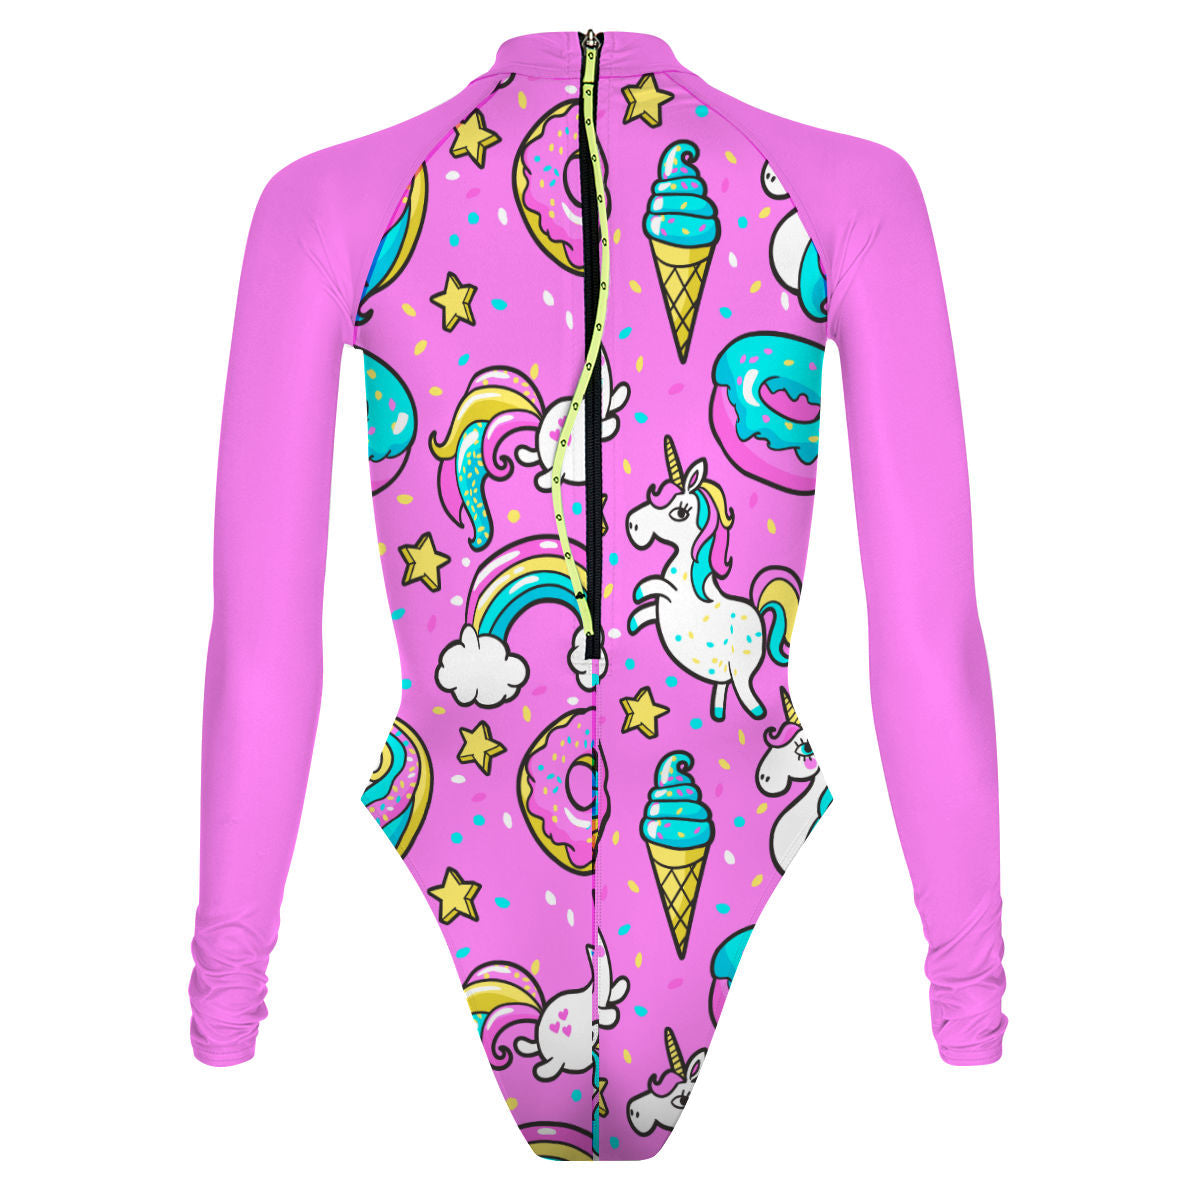 Confetti - Surf Swimming Suit Cheeky Cut